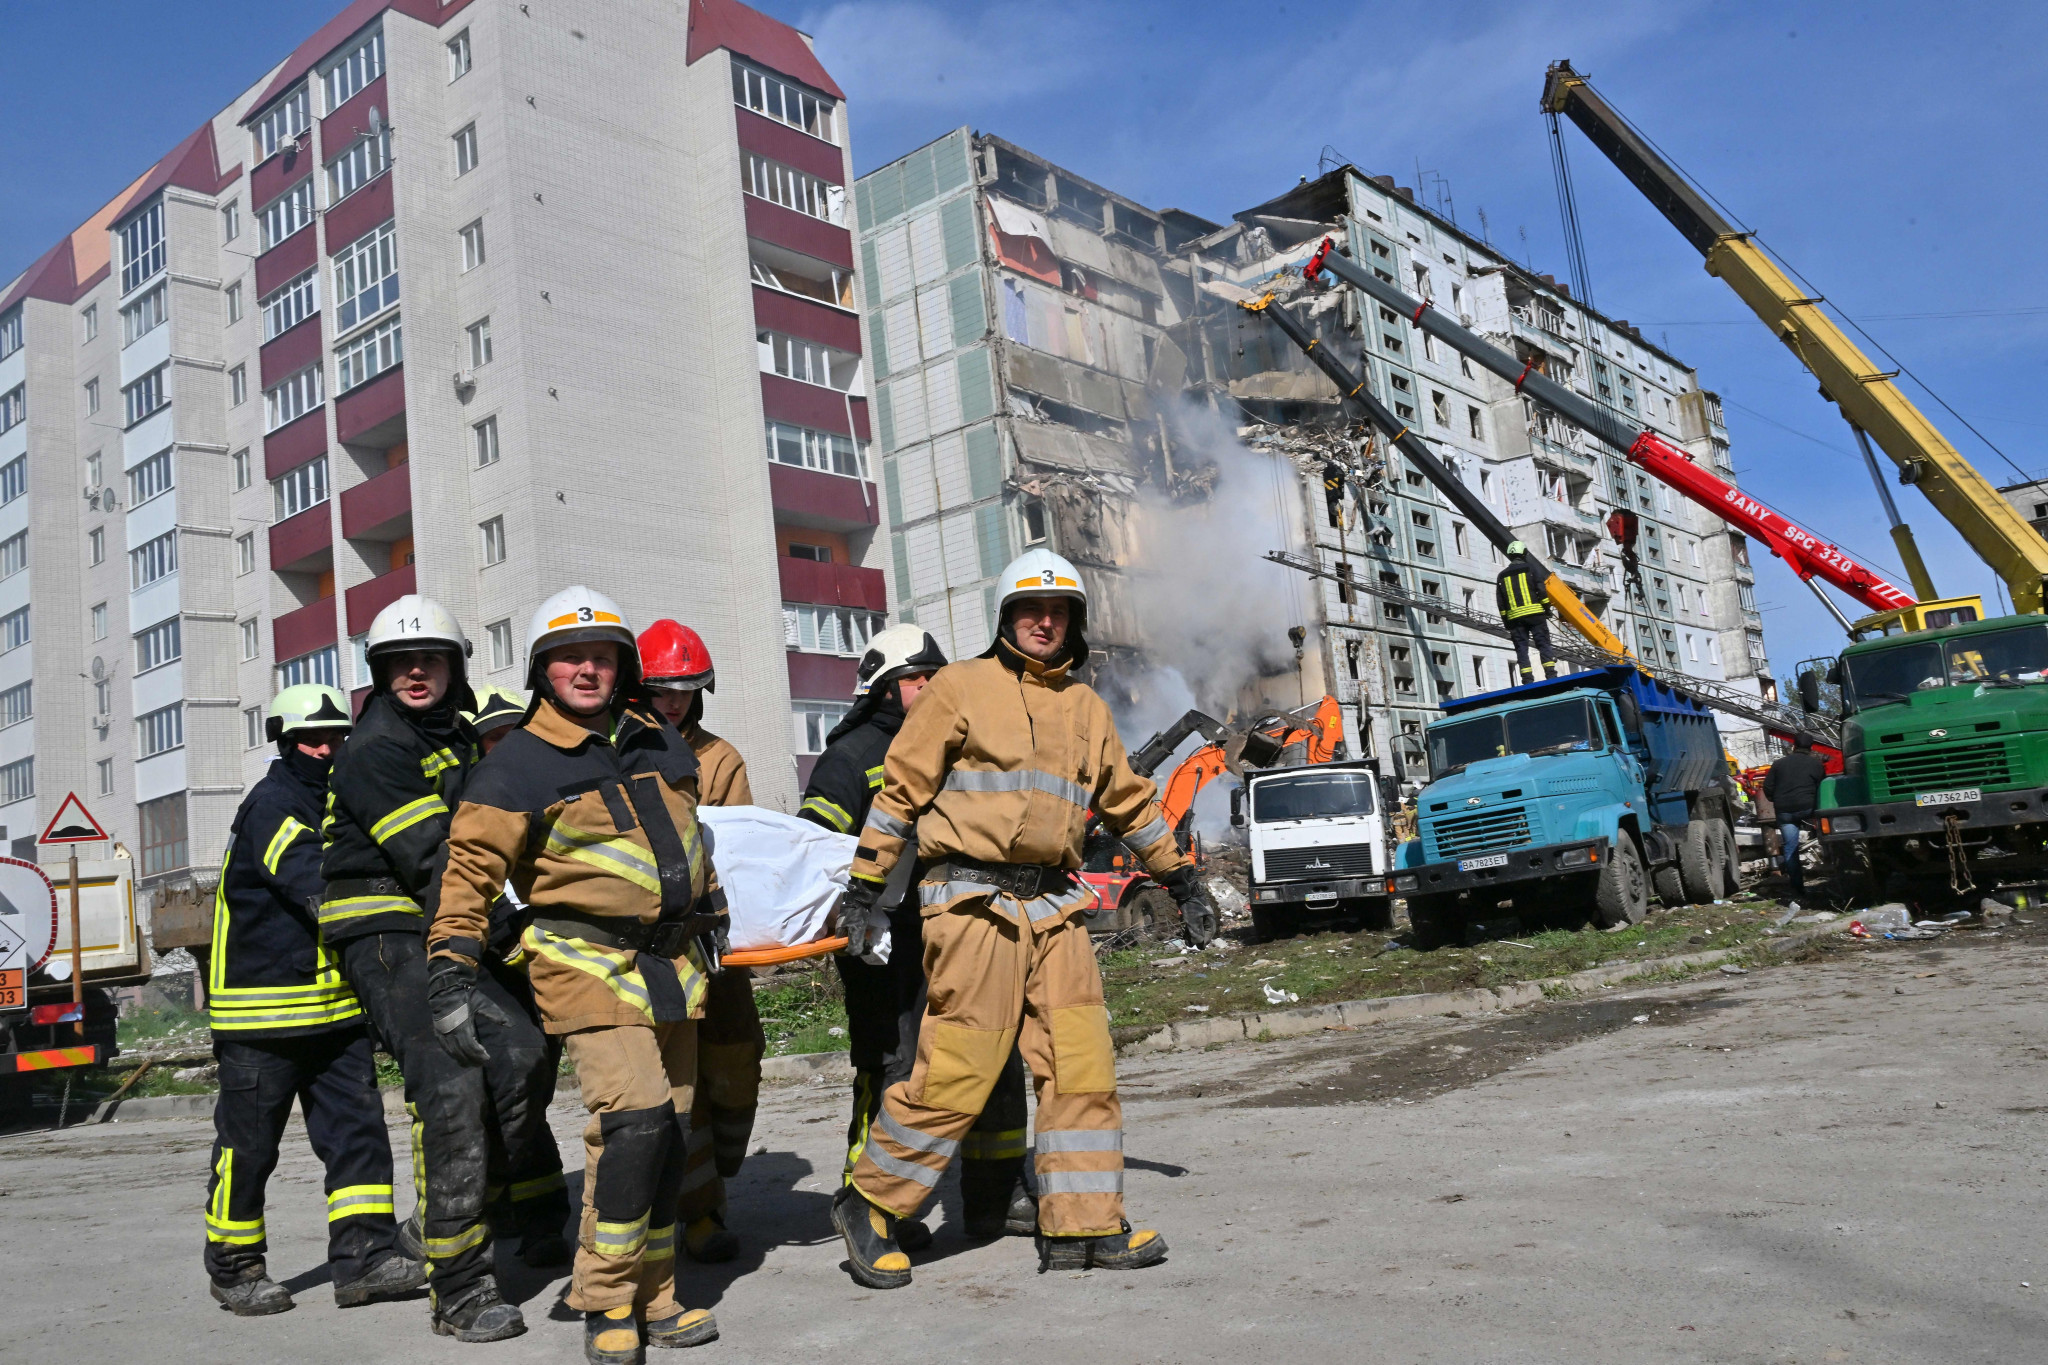 Rescuers carry a bag containing a body next to damaged residential buildings in Uman after Russian missile strikes targeted several Ukrainian cities today ©Getty Images